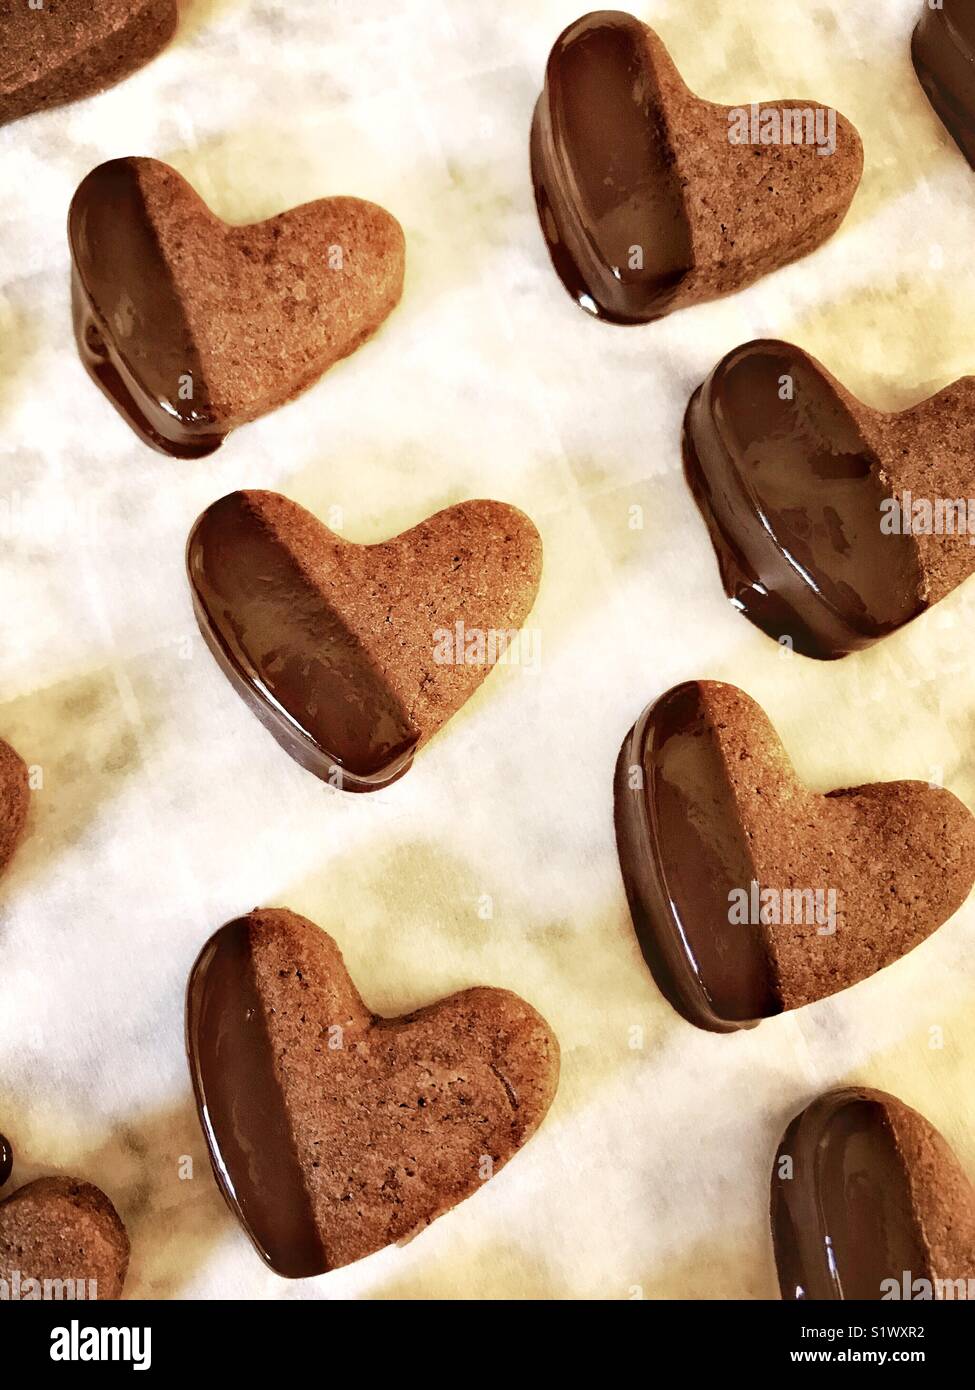 Just baked chocolate heart shaped cookies are partially dipped in chocolate and are placed on a cookie sheet to dry. Stock Photo